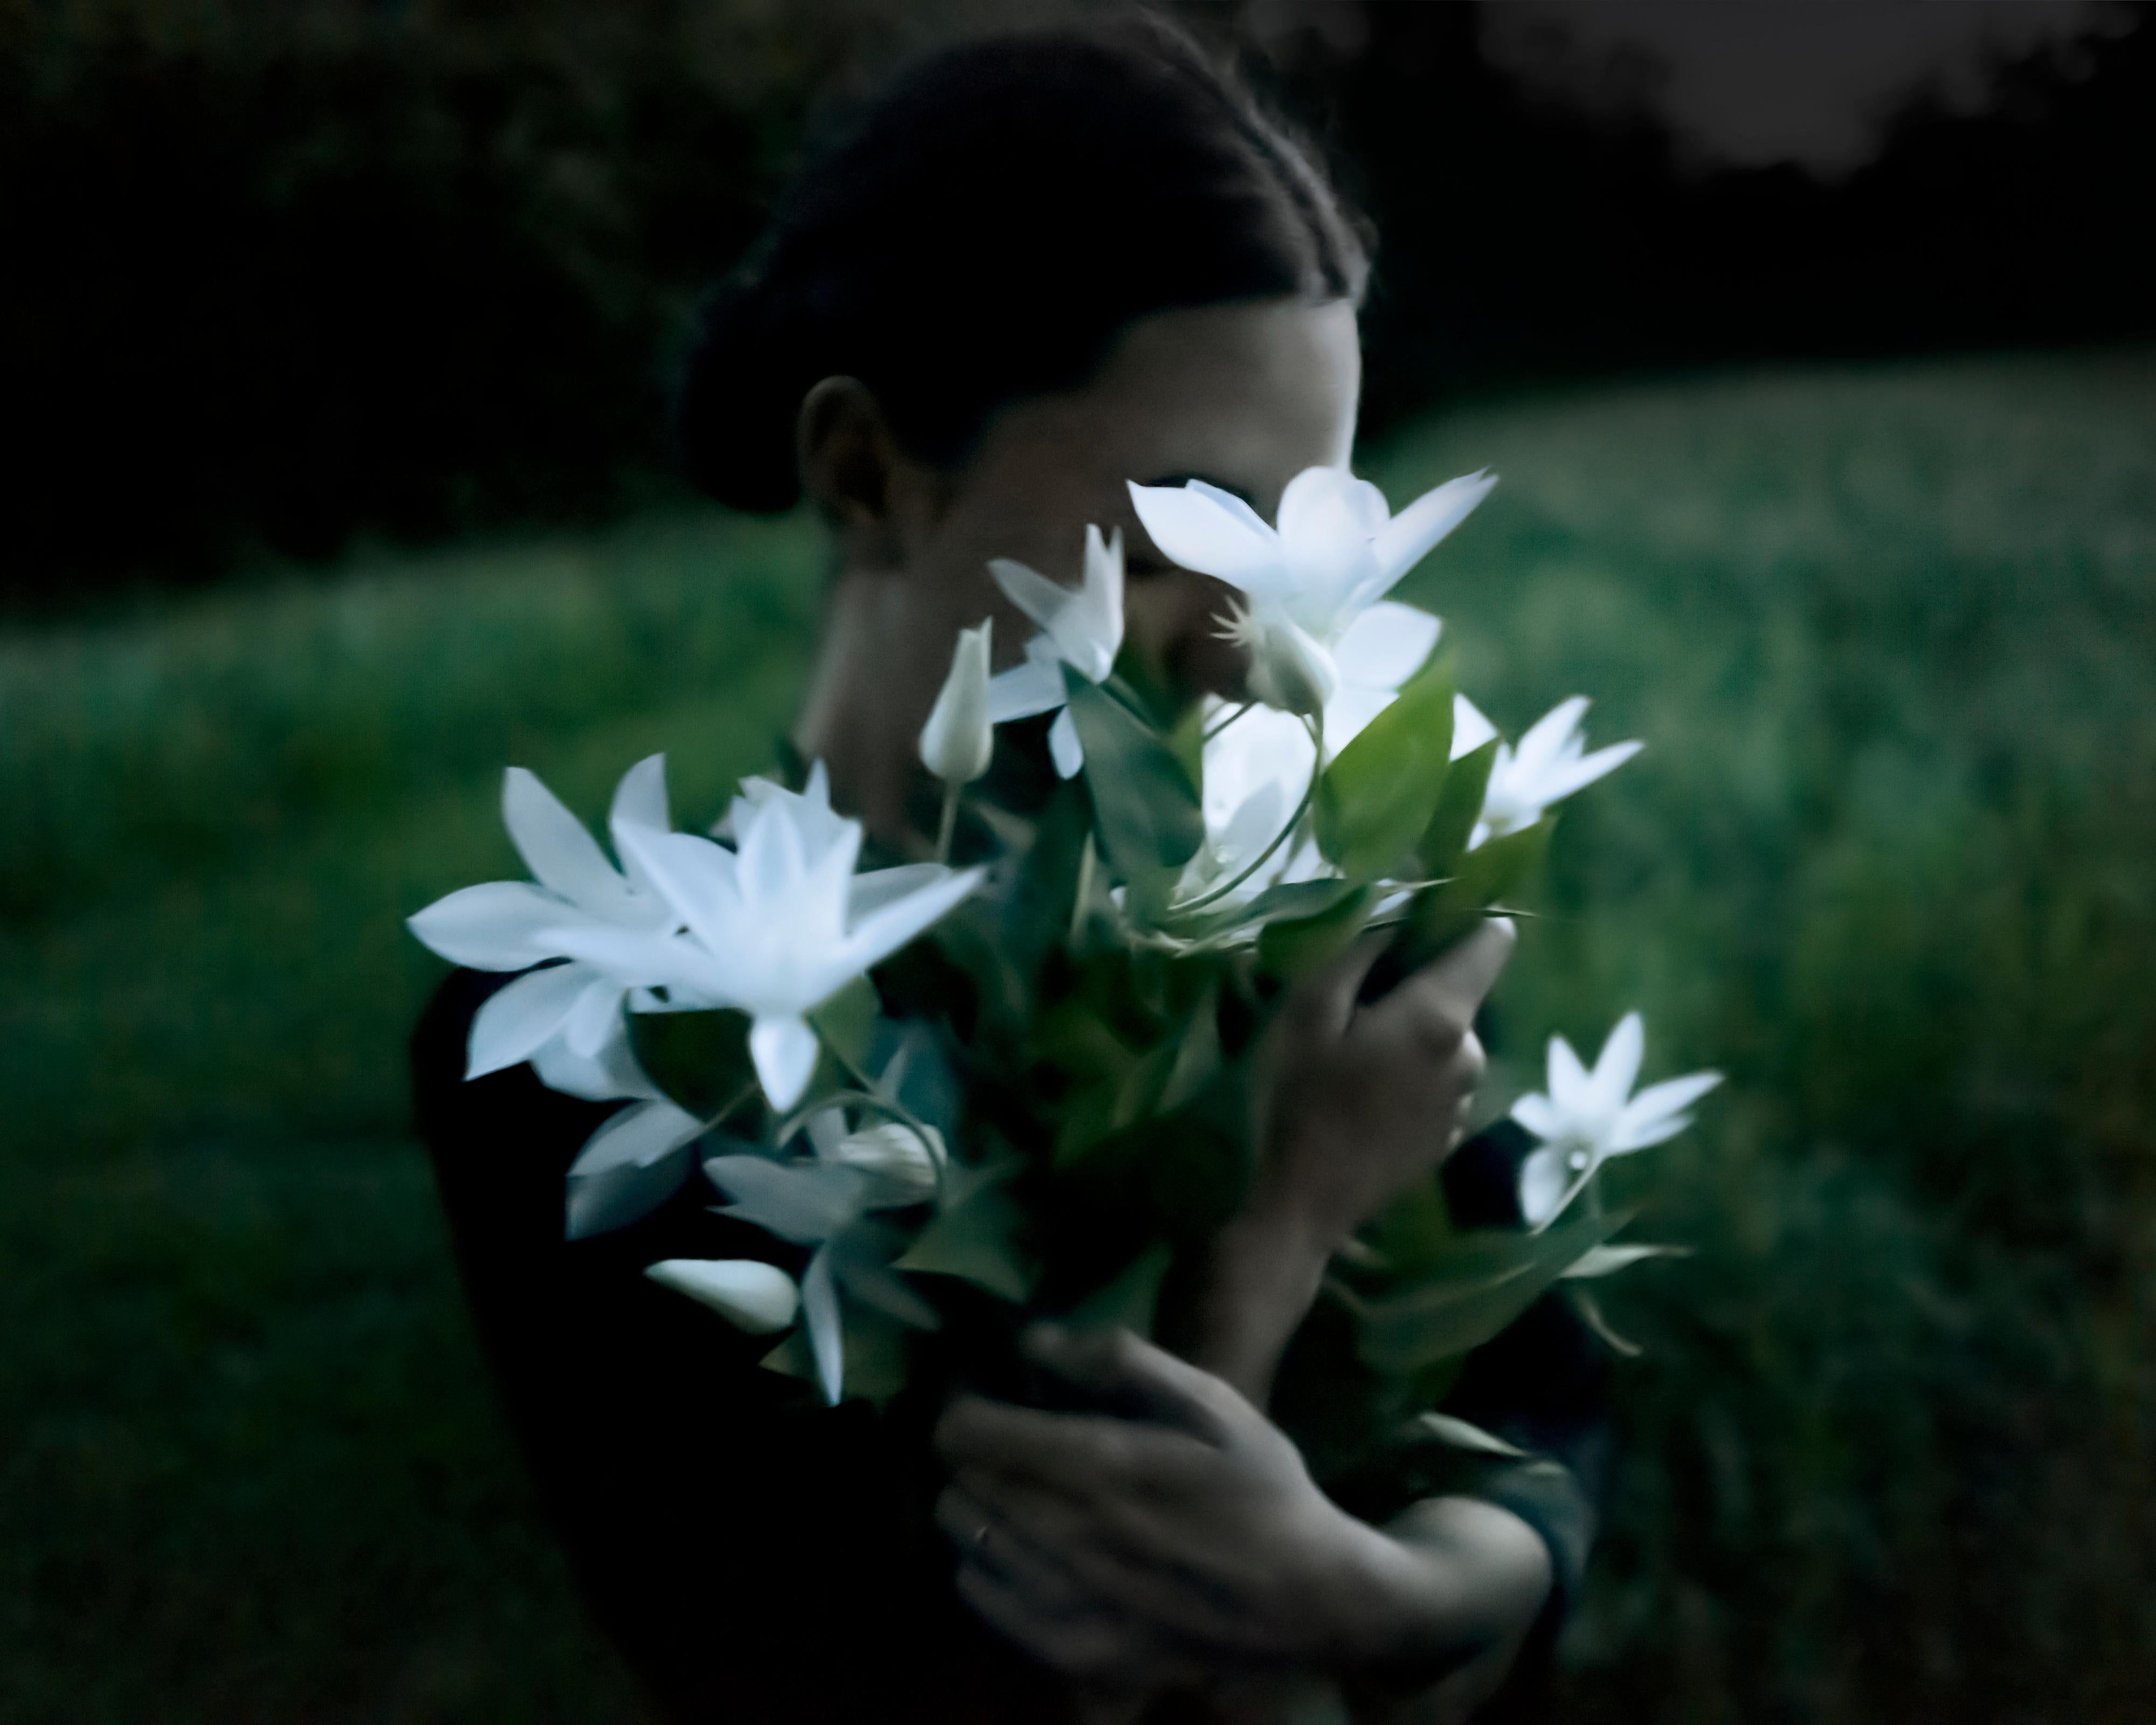 Cig Harvey Color Photograph - Clematis, (Emily Clutching), 2021